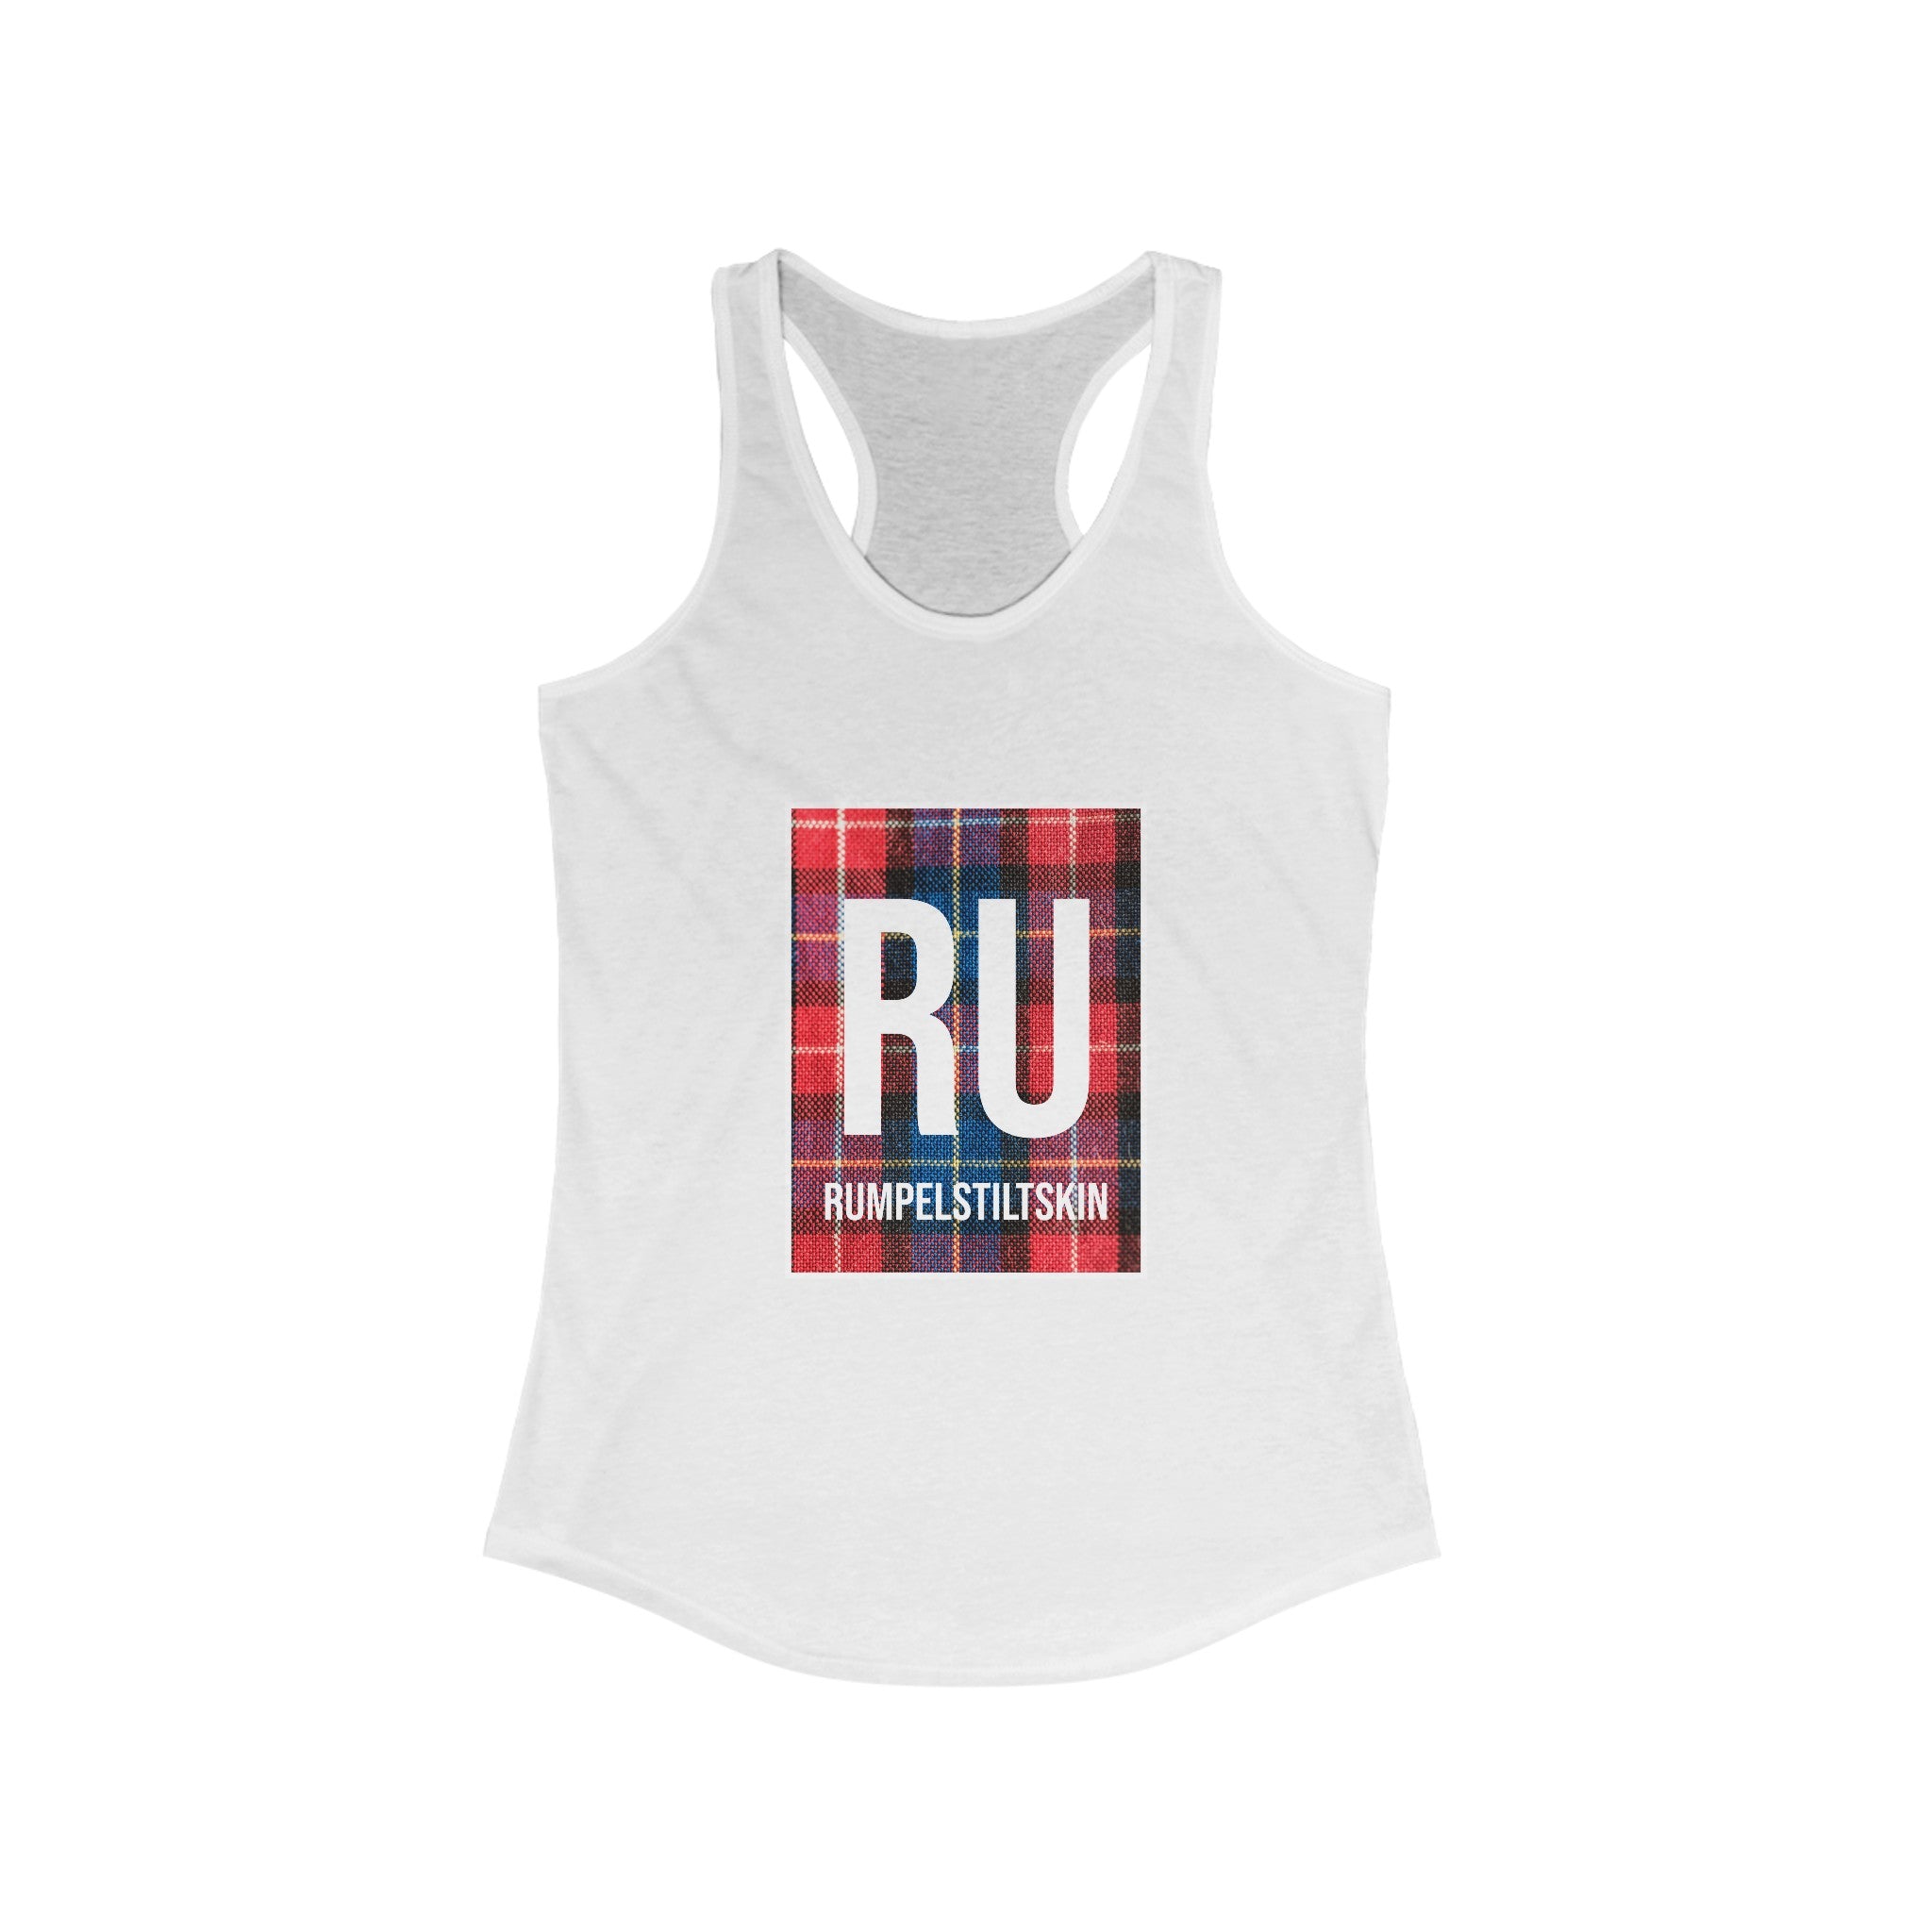 Embrace a stylish workout with the RU - Women's Racerback Tank. Featuring a red and blue plaid graphic, large white "RU" letters, and the word "Rumpelstiltskin" below, it's perfect for any fitness routine.